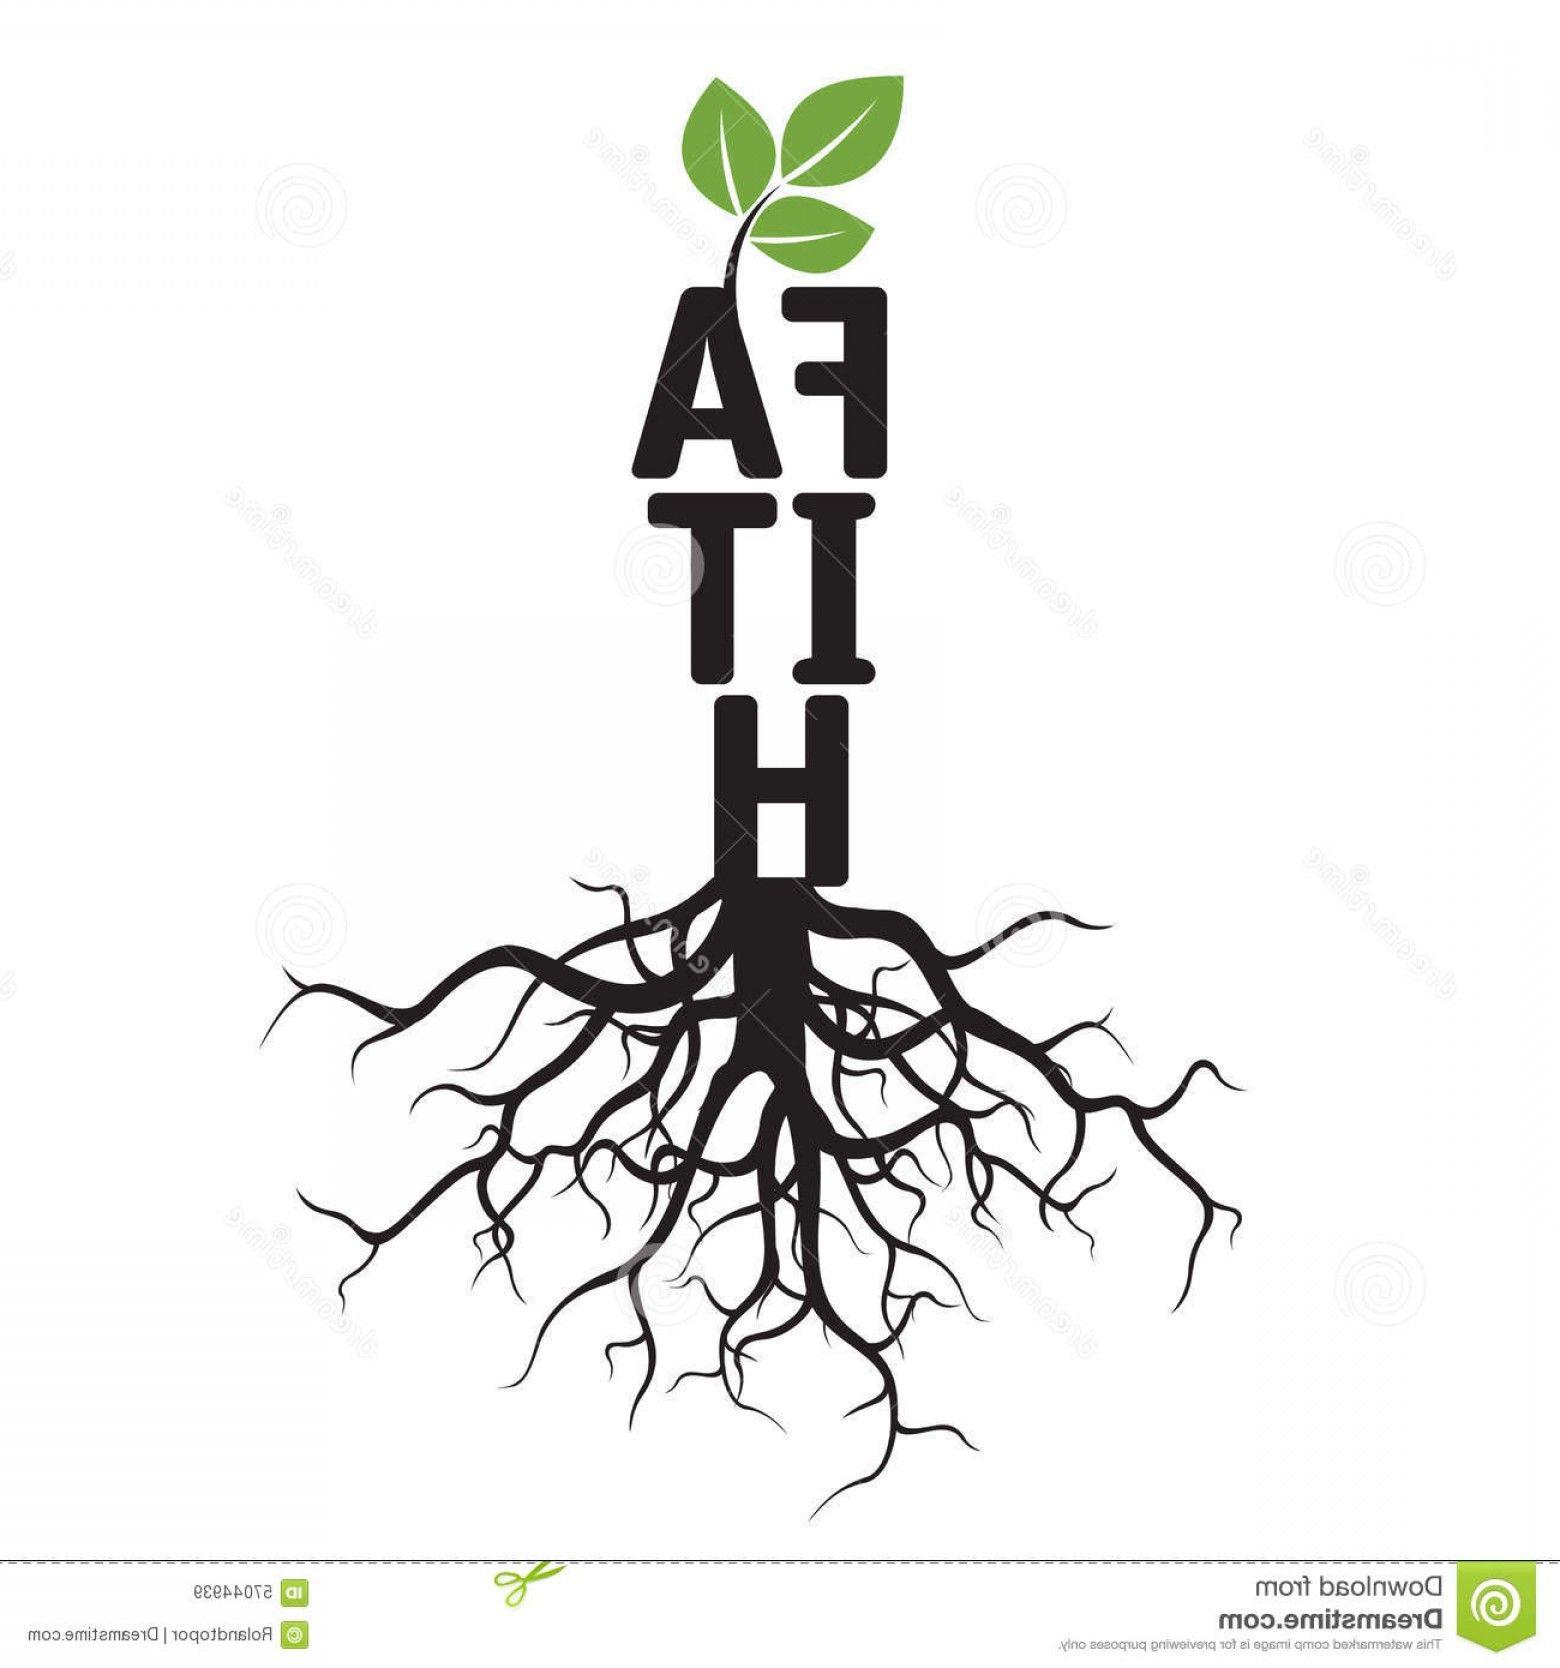 Black Tree with Roots Logo - Stock Illustration Black Tree Roots Text Faith Vector Illustration